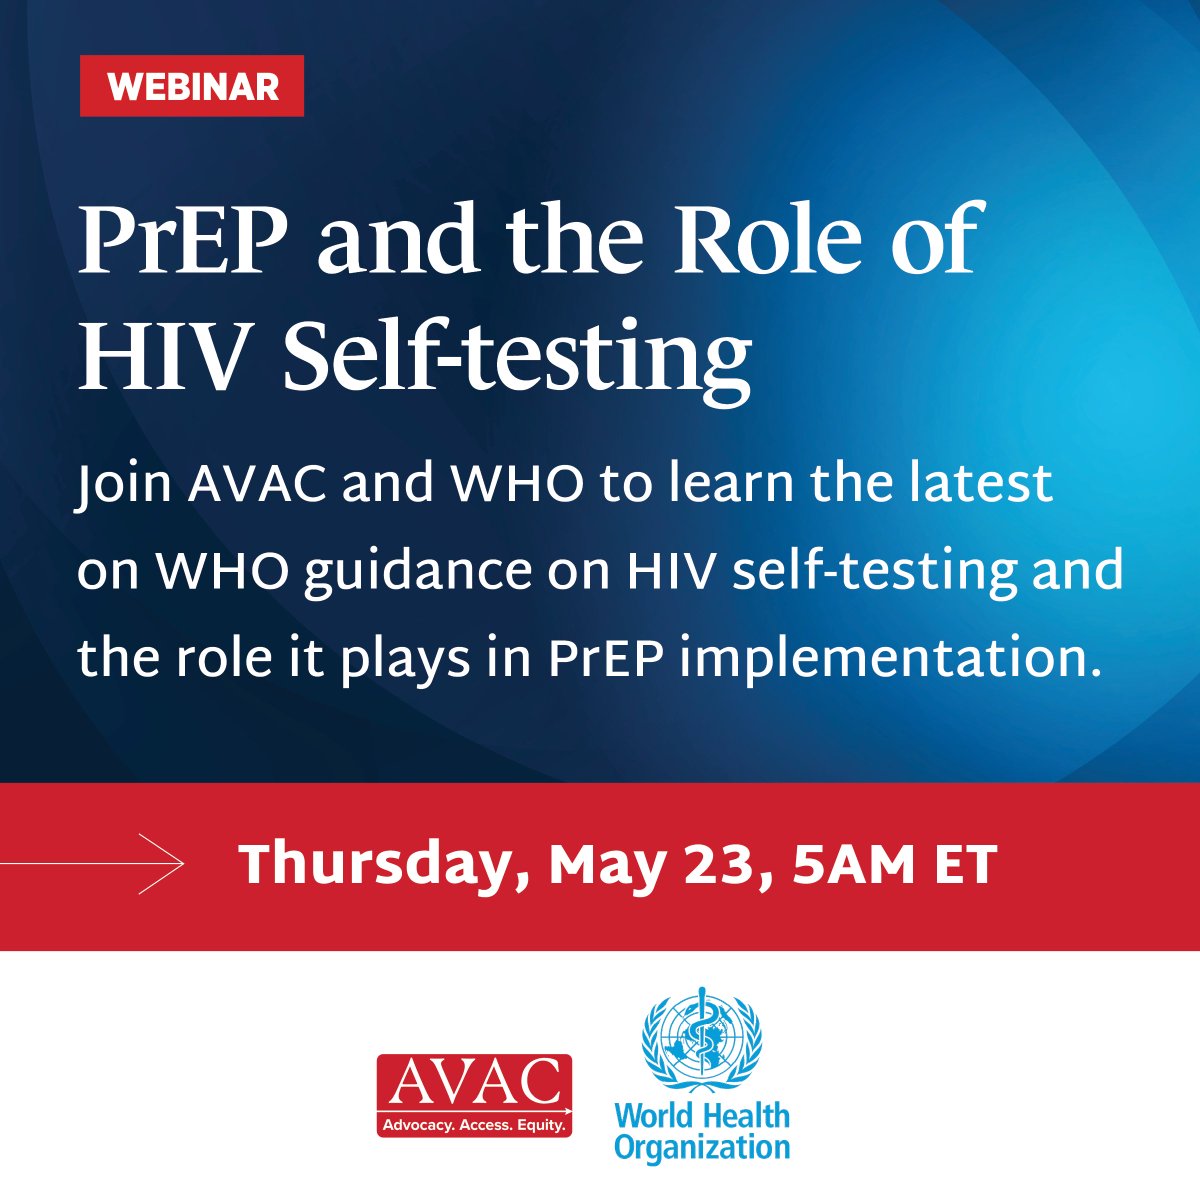 This Thursday at 5AM ET/3PM EAT! Join AVAC and @WHO to learn and discuss WHO's guidance on #HIV self-testing (#HIVST) and the role it plays in #PrEP access and implementation. Register and explore more about the webinar here 📌 avac.org/event/prep-and…